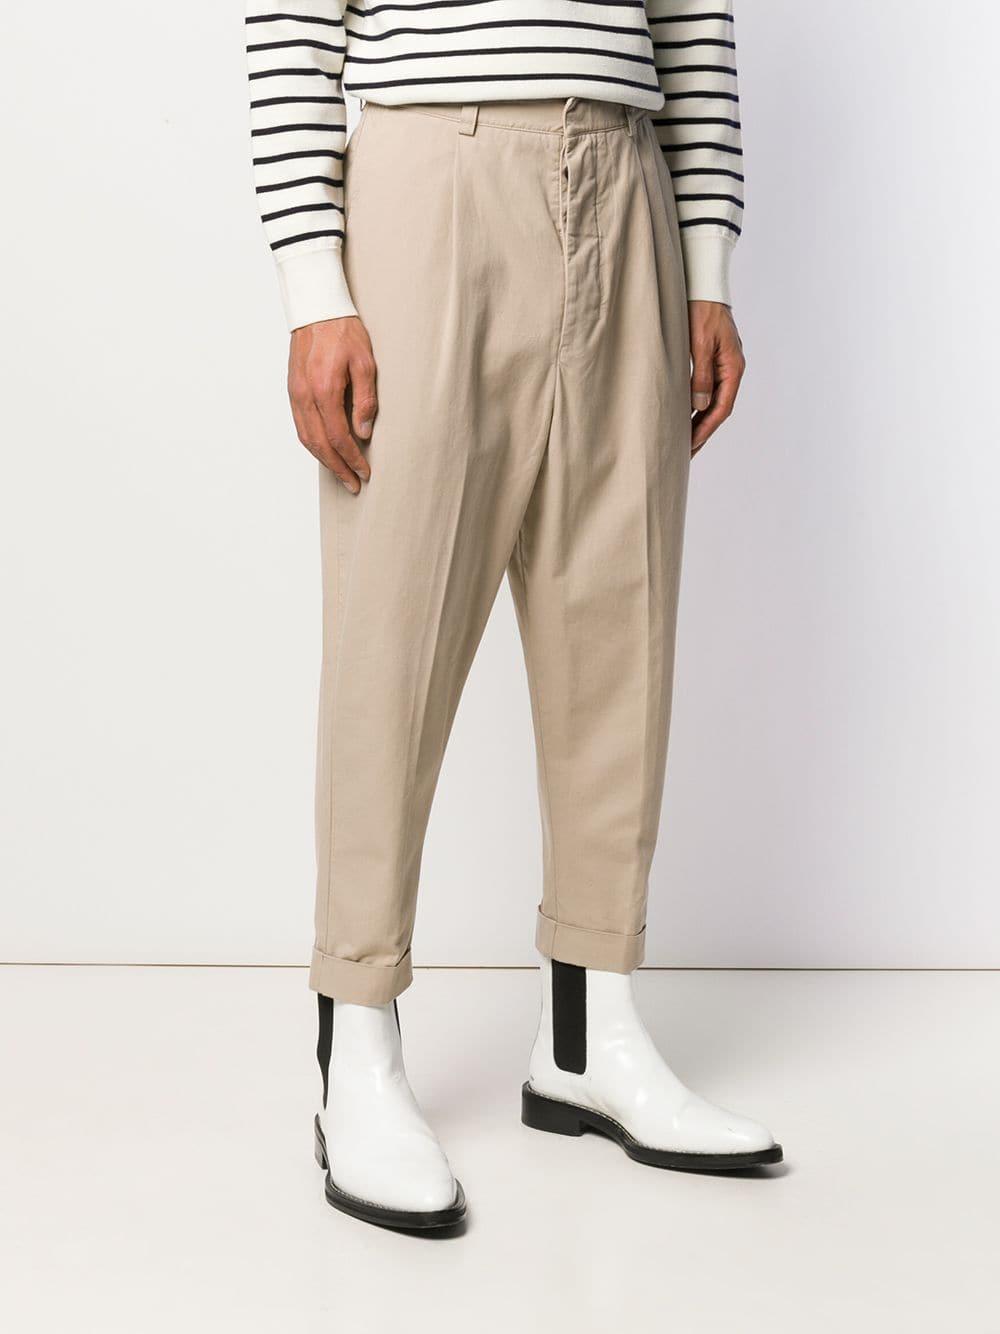 AMI Oversized Carrot Fit Trousers in Natural for Men - Lyst